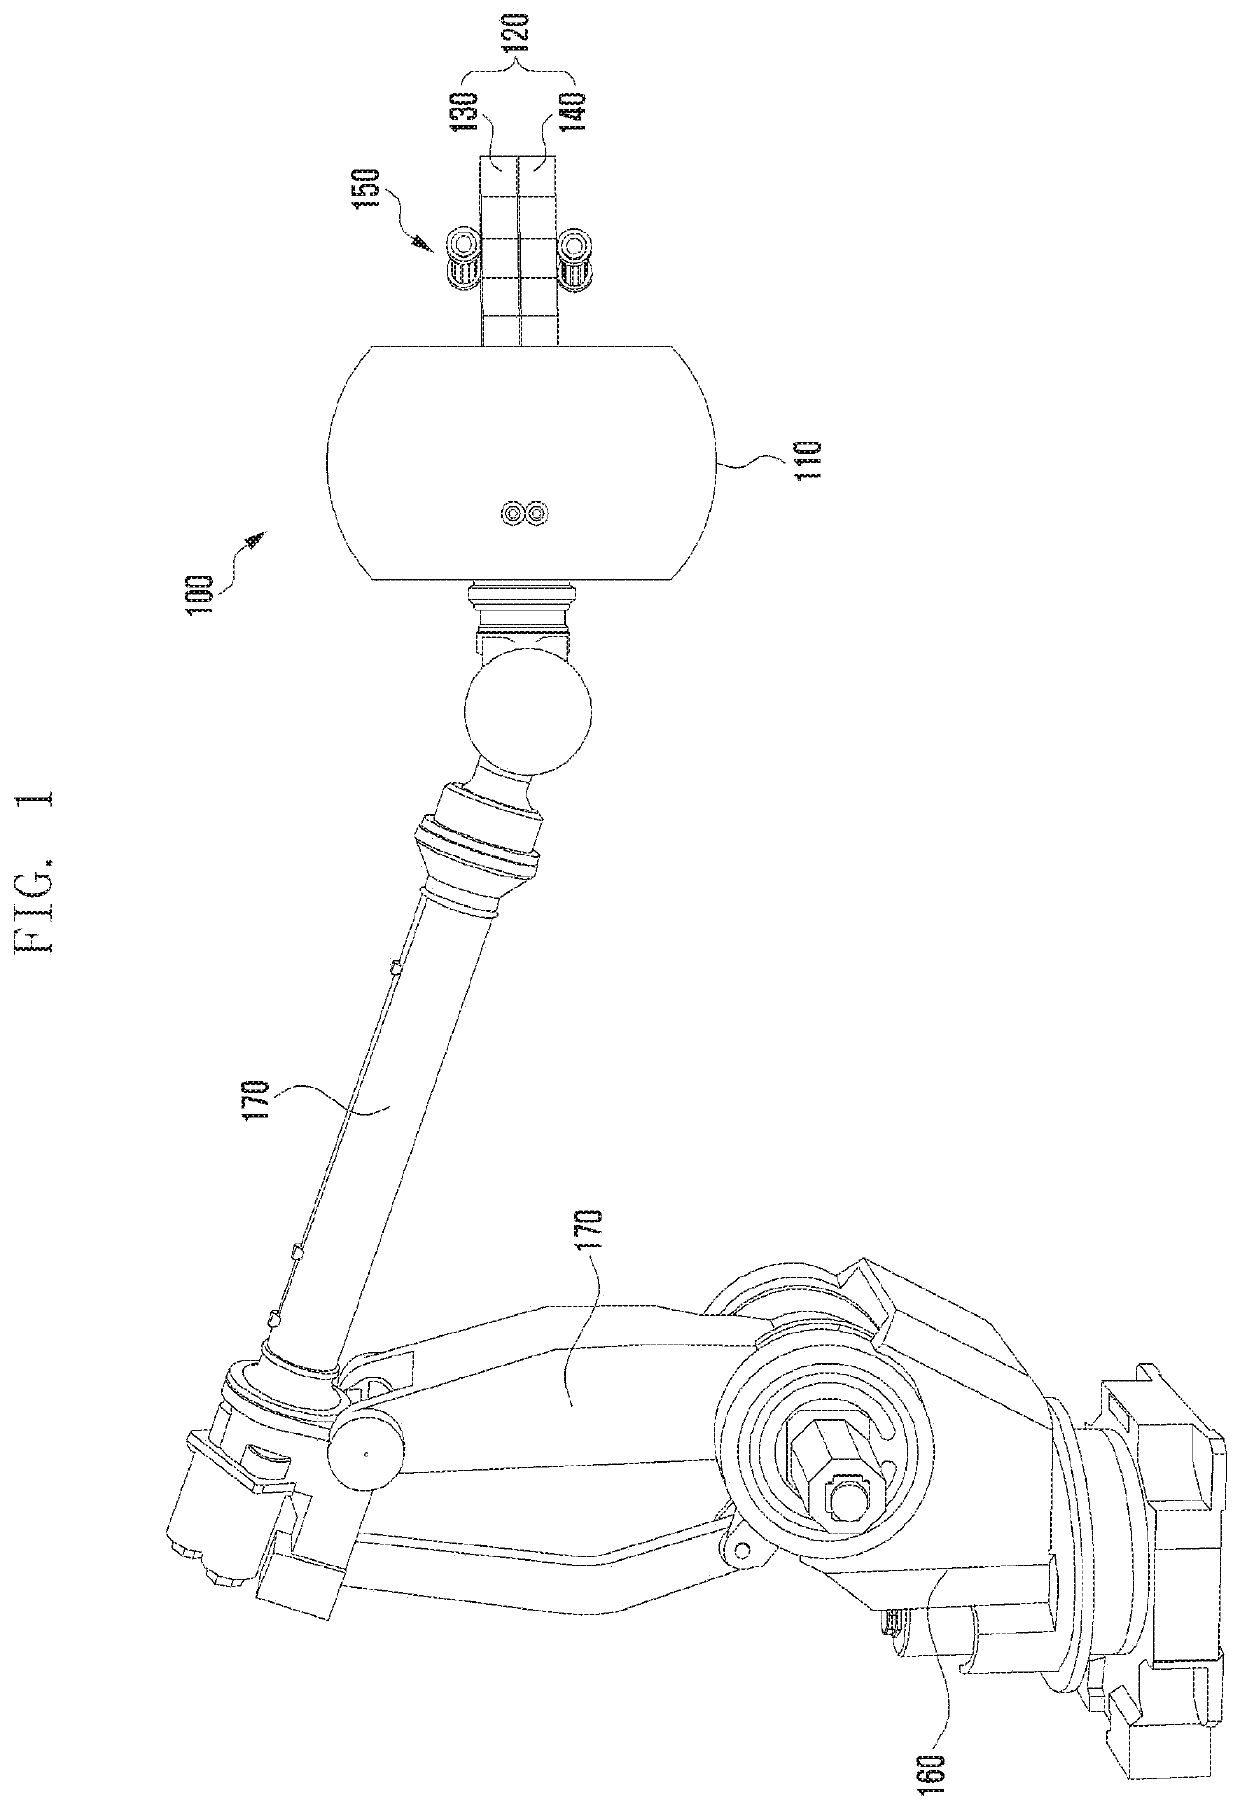 Robot arm extension device and robot including same